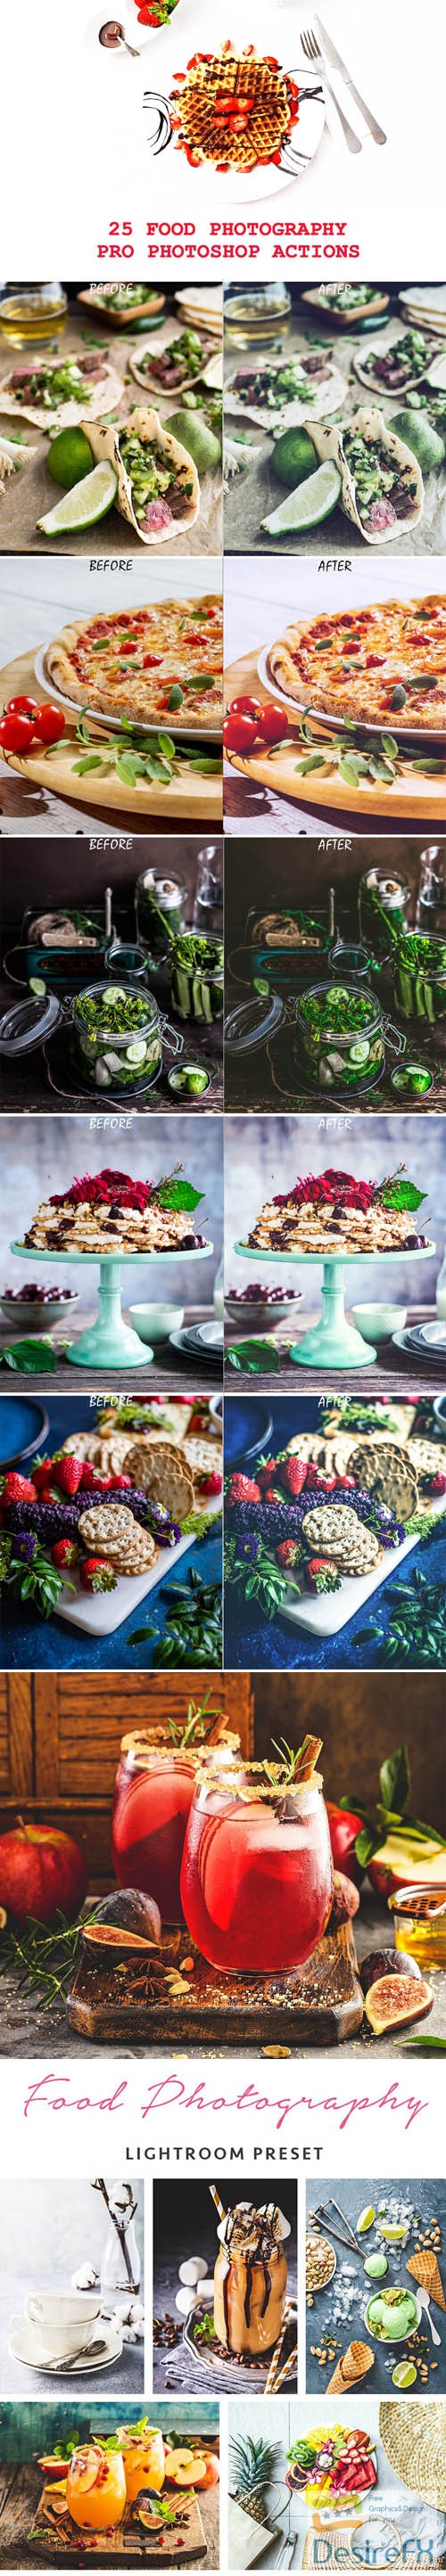 25 Food Photography Pro Photoshop Actions &amp; Lightroom Presets